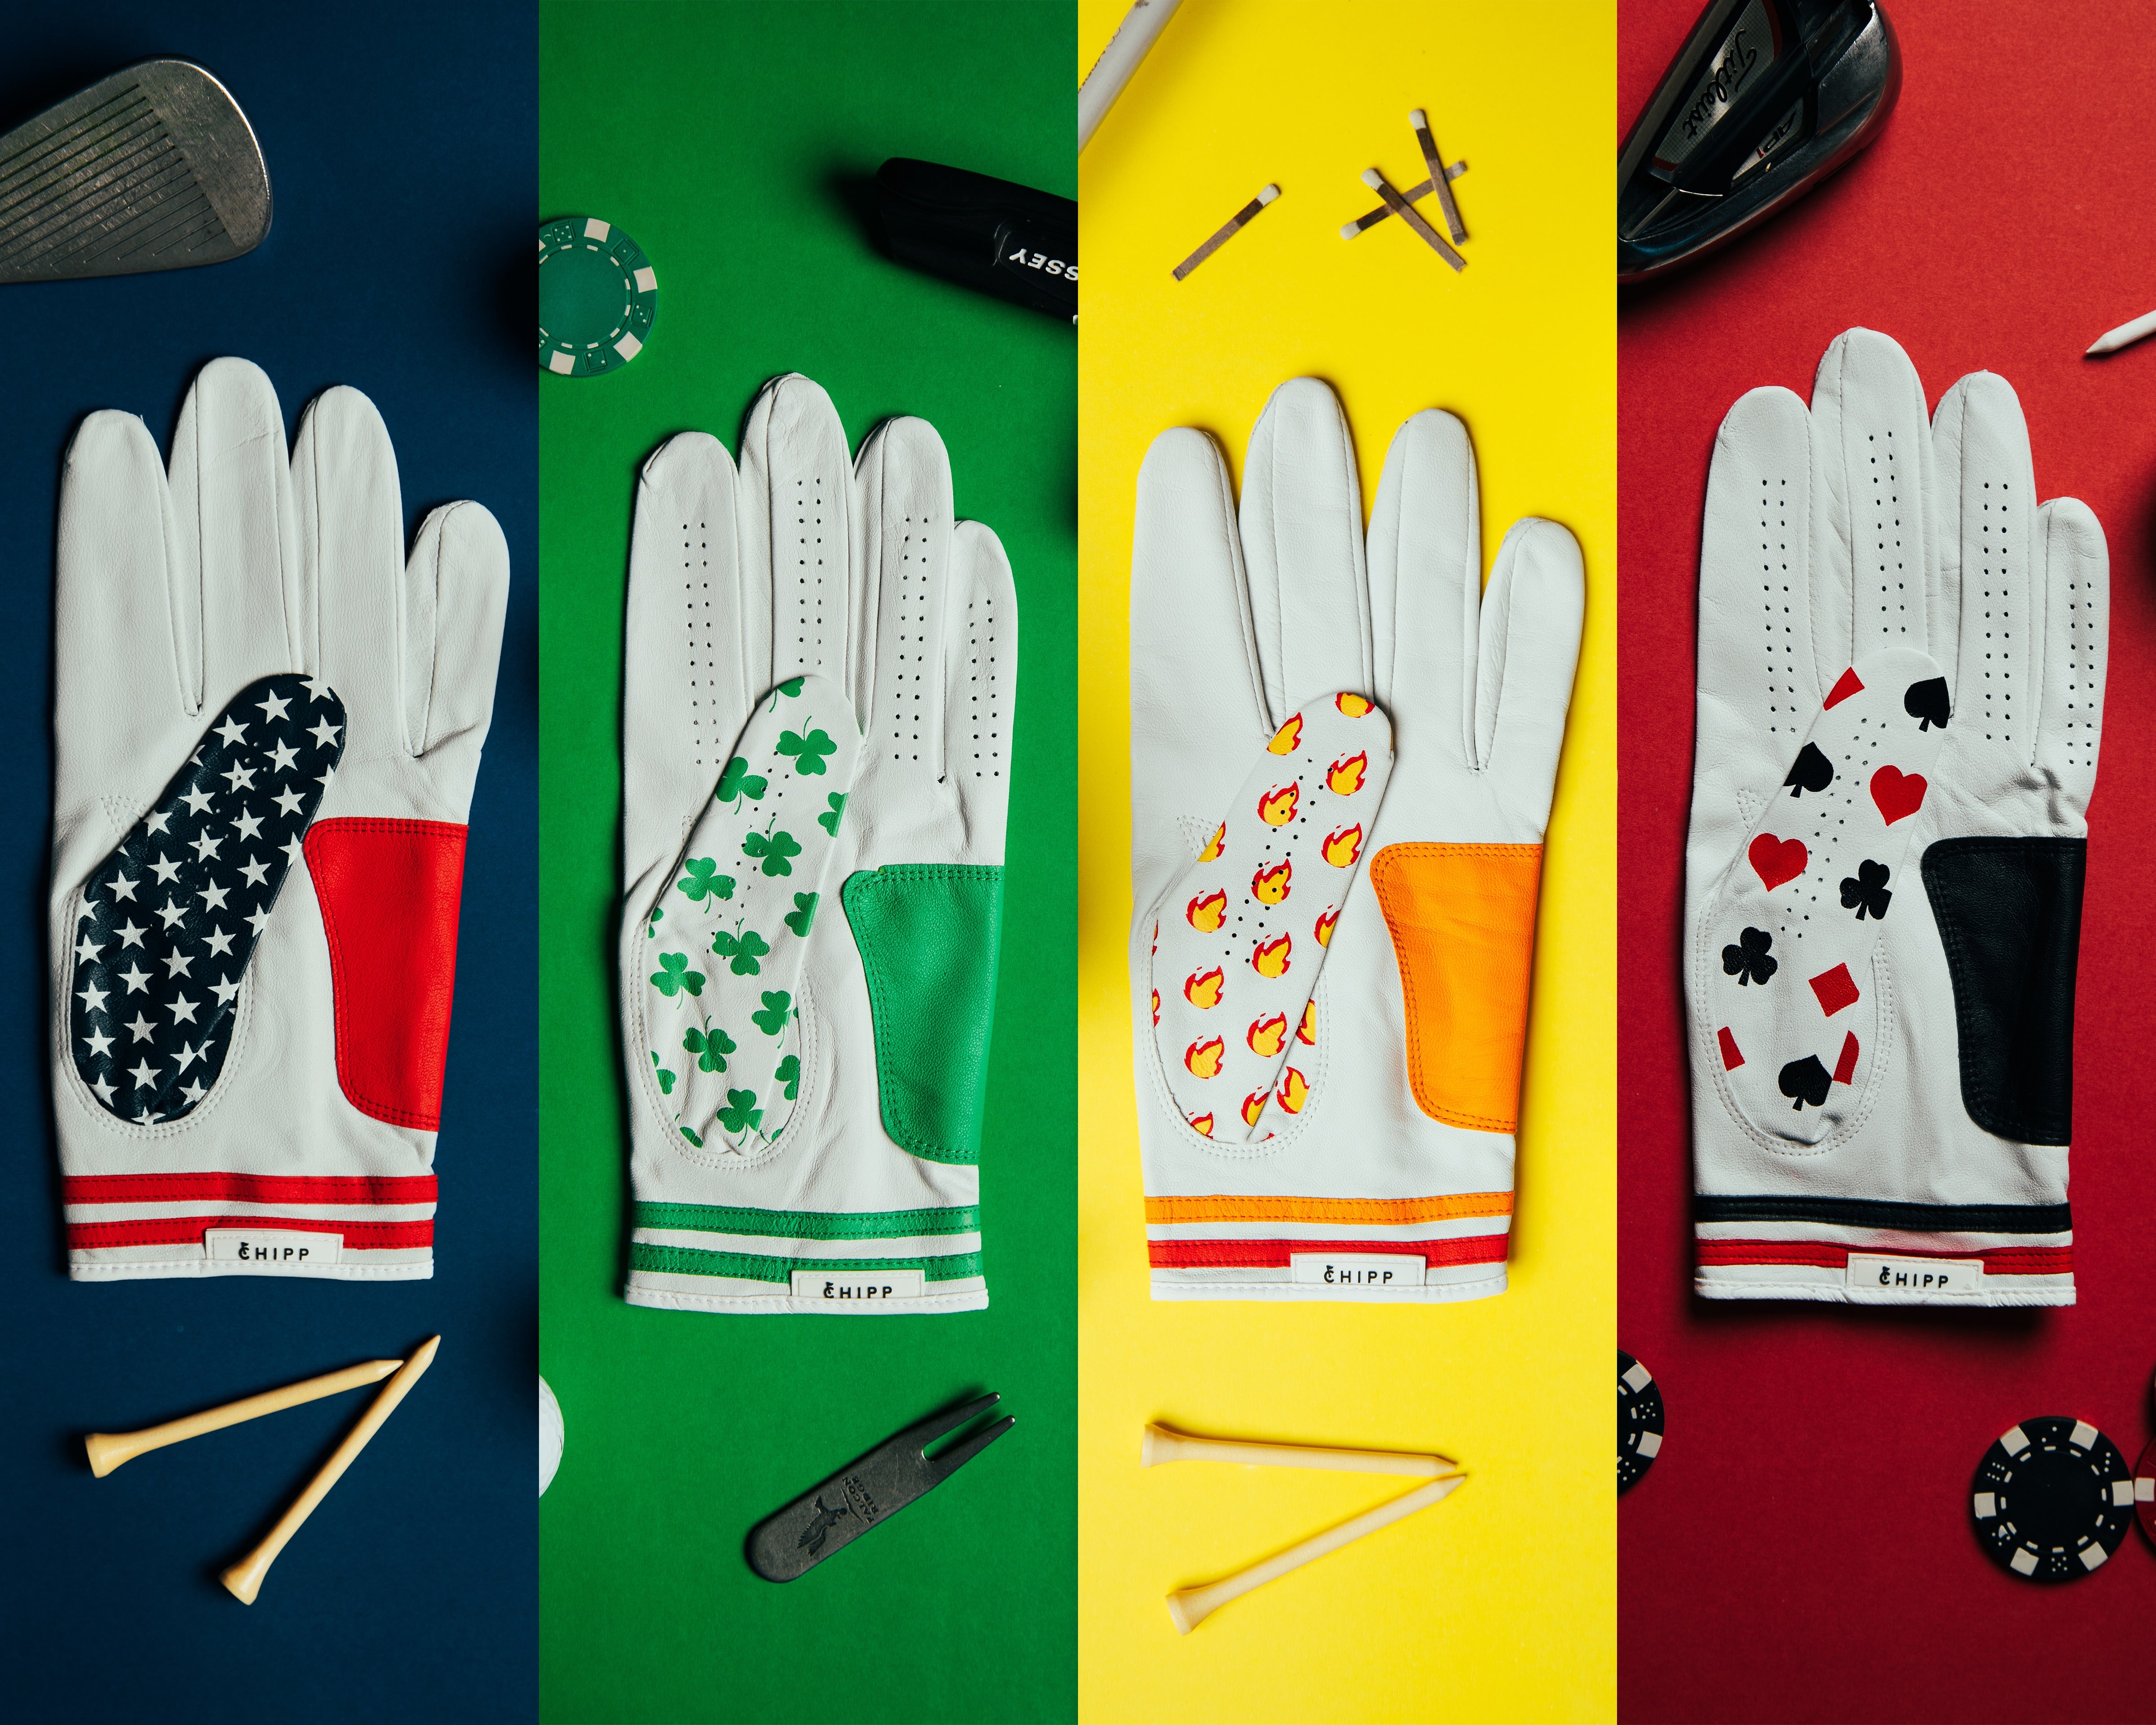 Chipp's Top Selling Golf Gloves